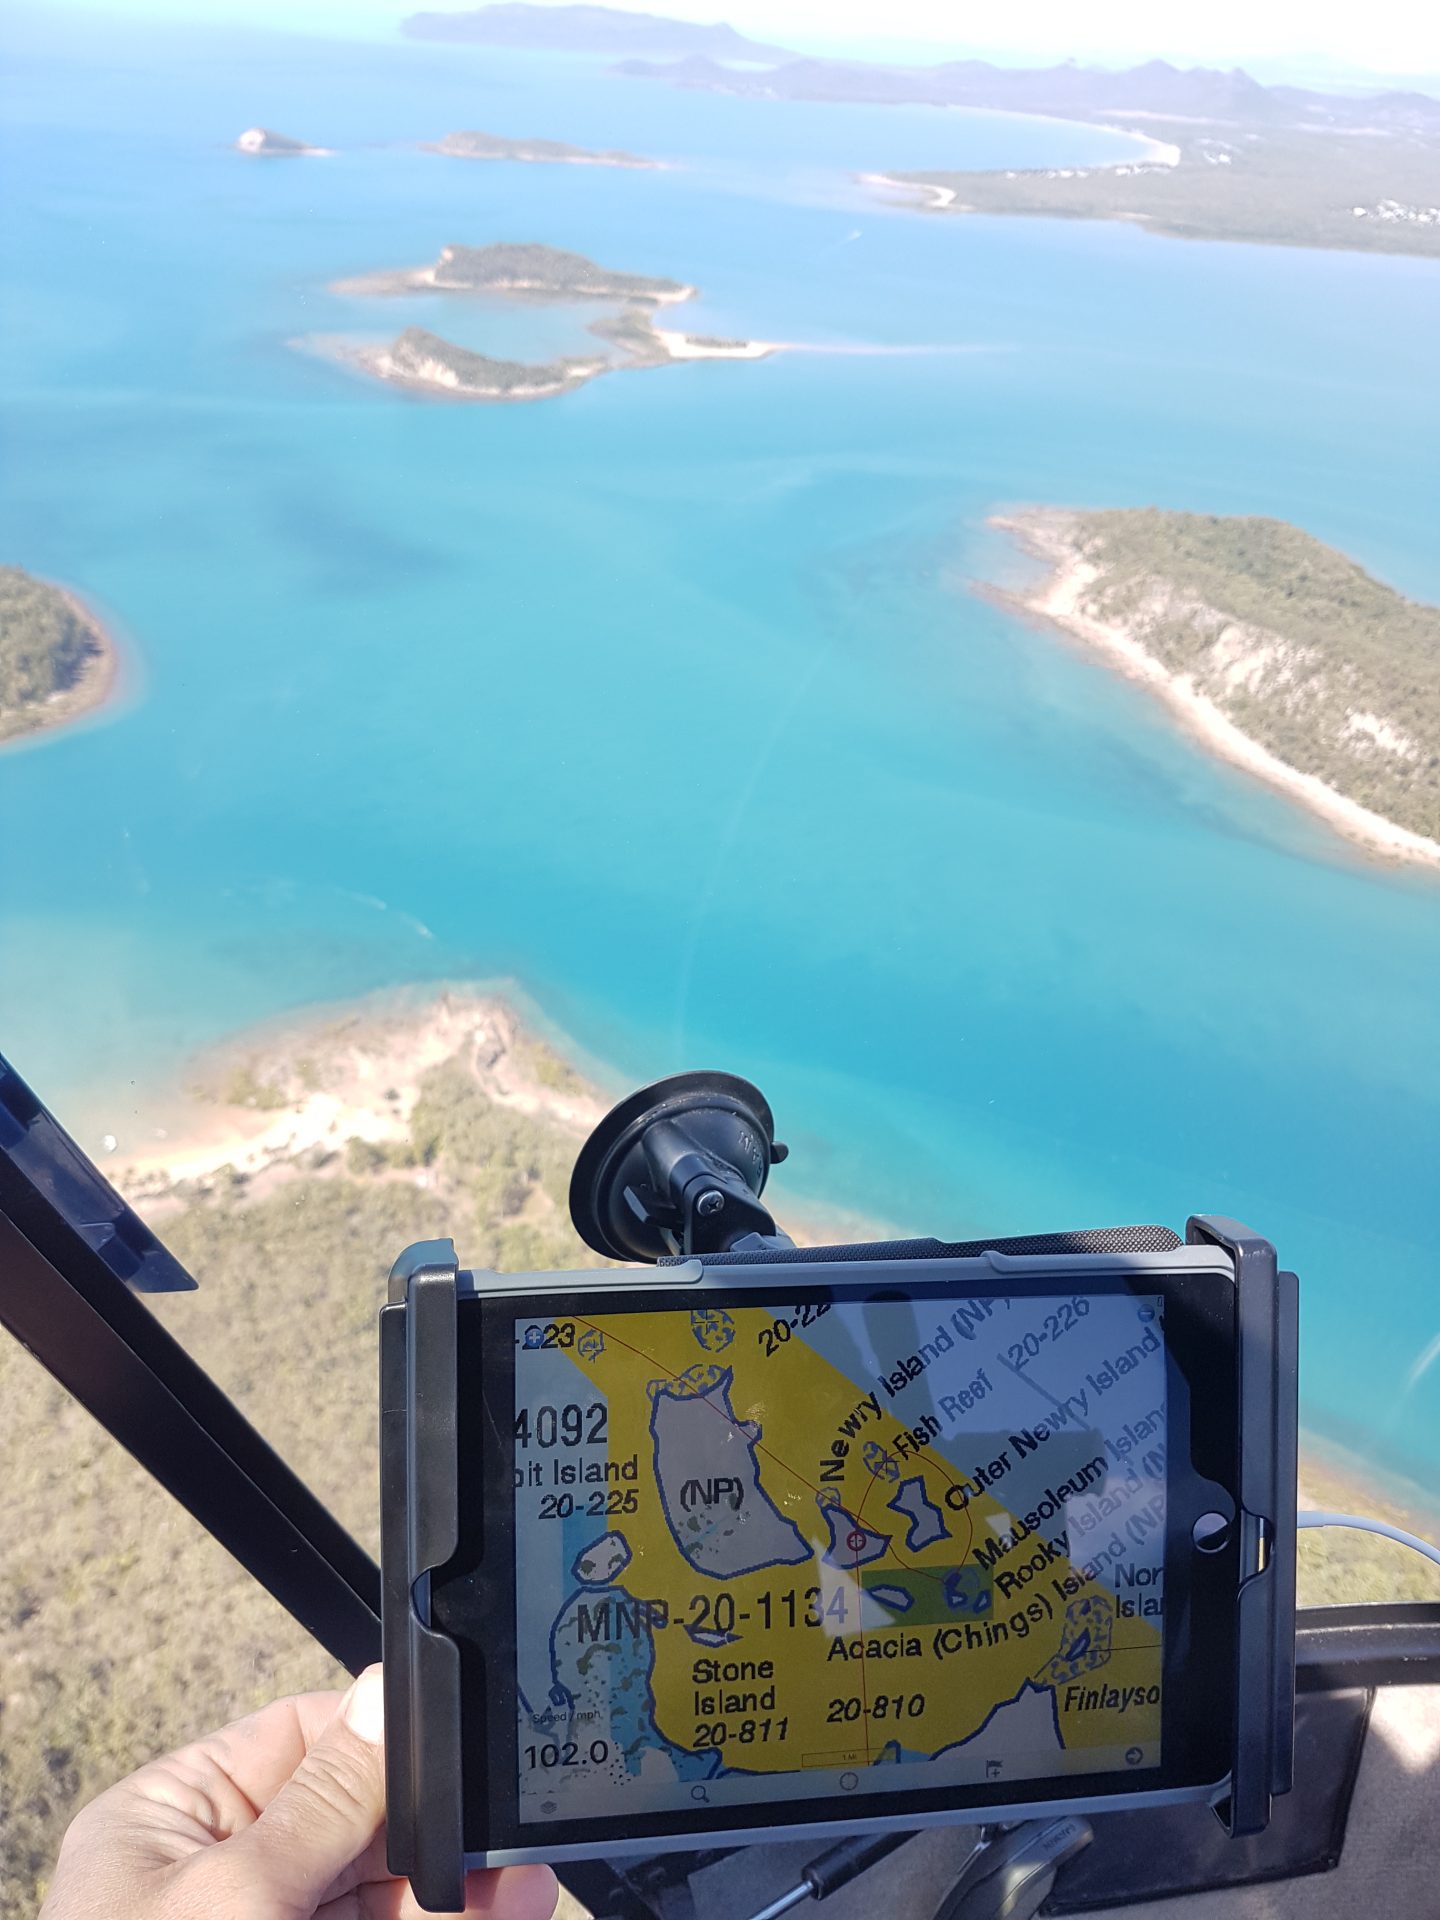 Easter patrols detected 39 illegal activities across the Great Barrier Reef Marine Park